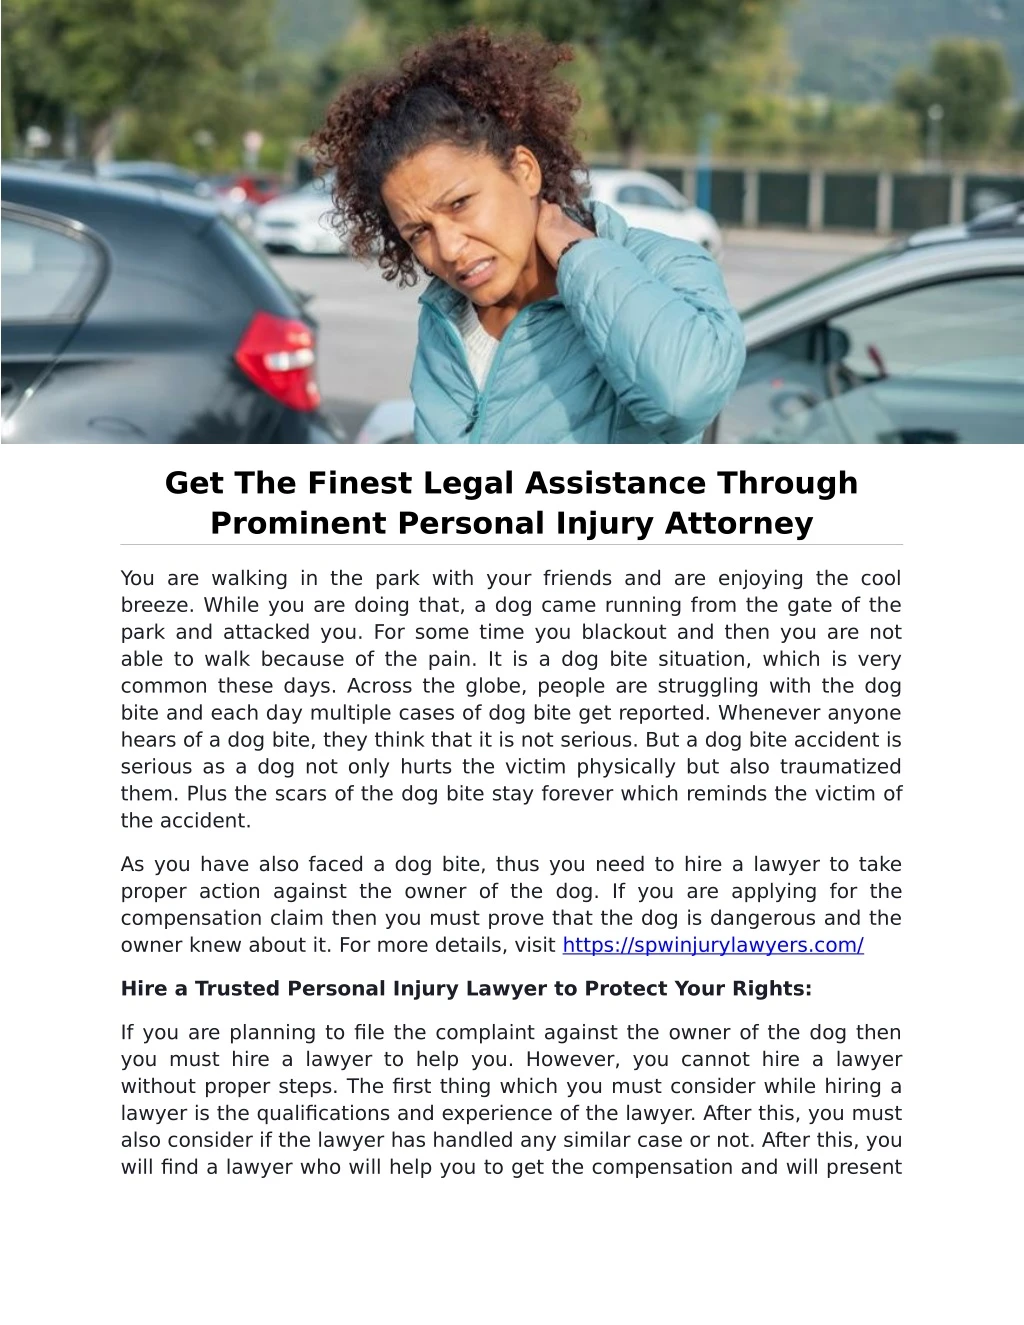 get the finest legal assistance through prominent